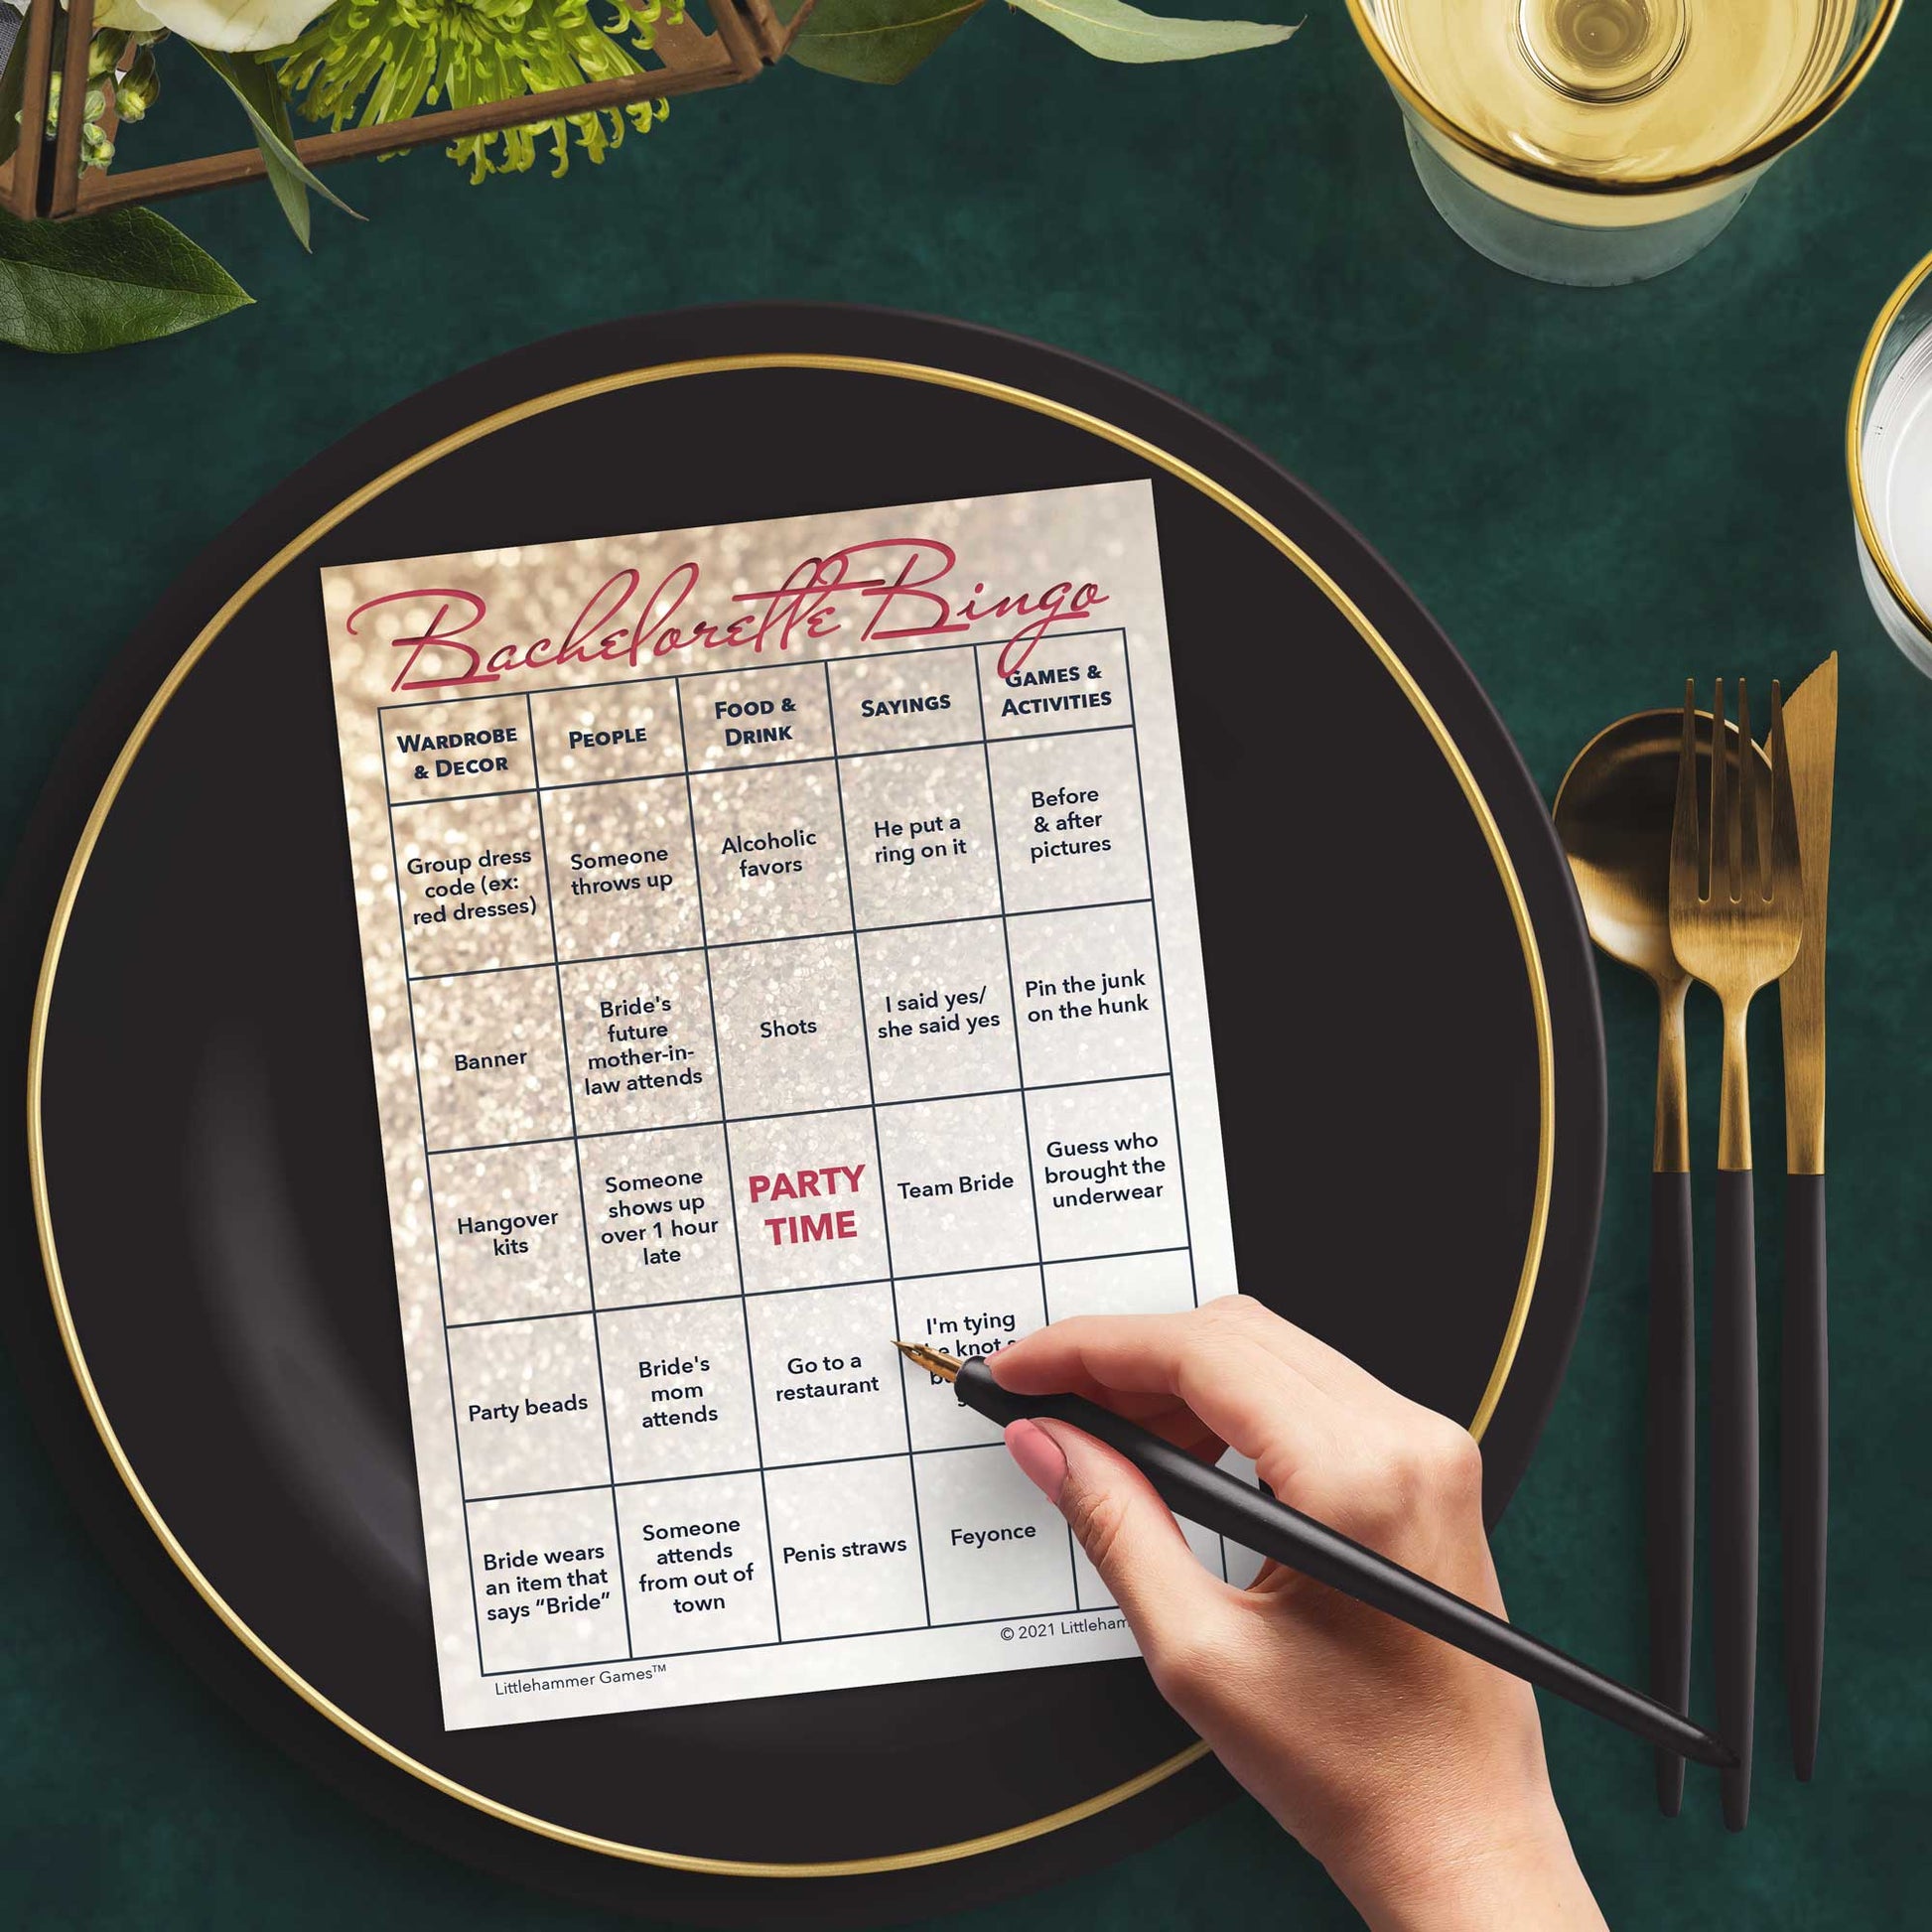 Woman with a pen sitting at a table with a glittery rose gold Bachelorette Bingo game card on a gold and black plate on a dark place setting